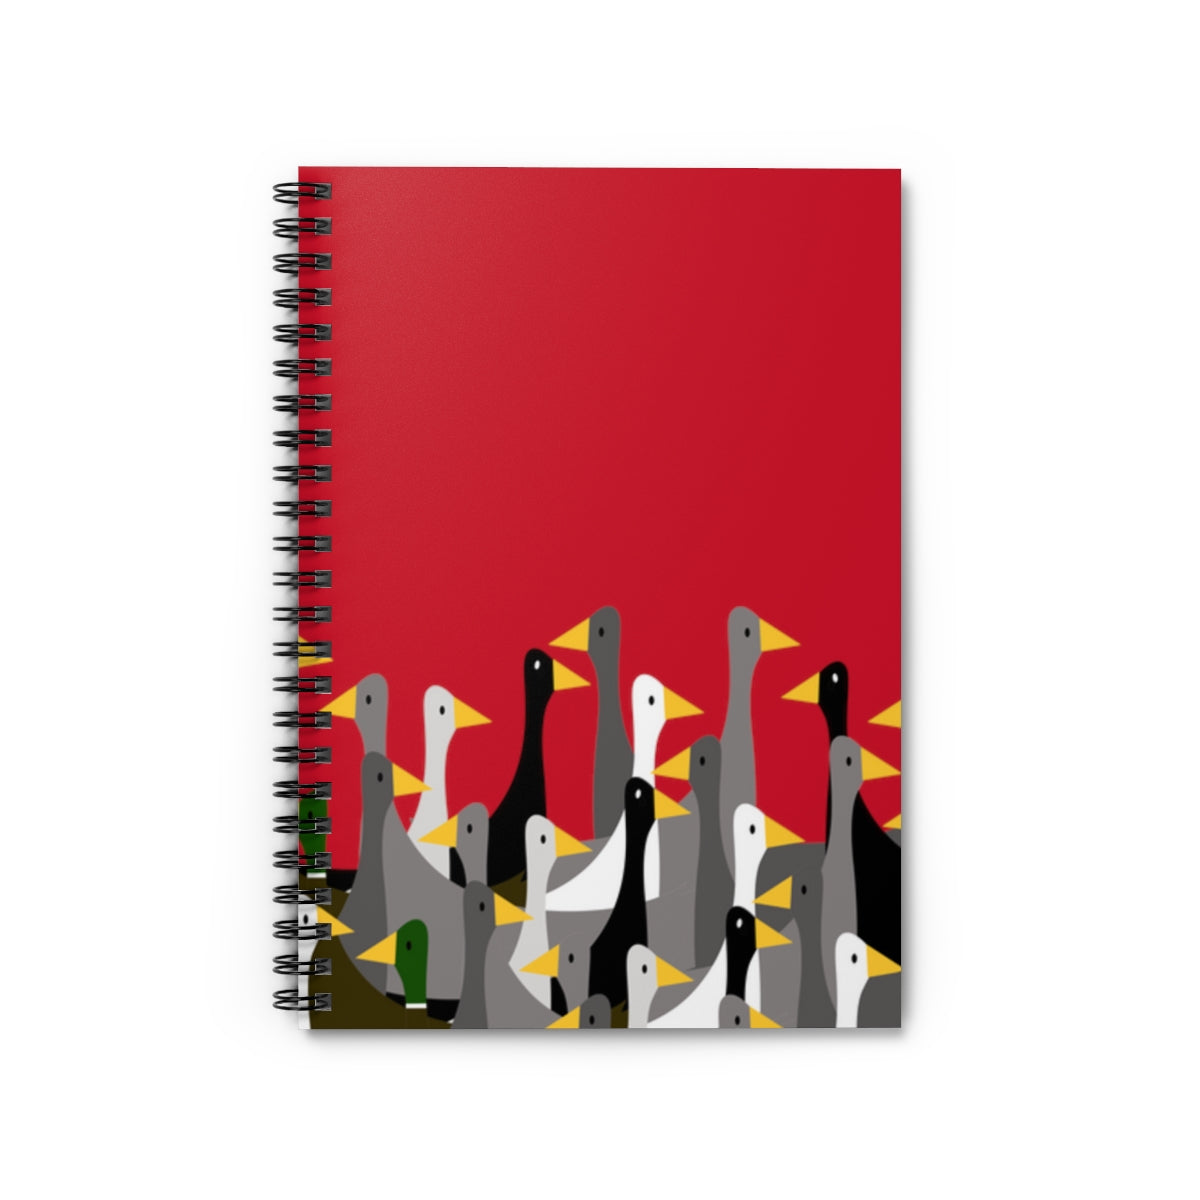 Not as many ducks - red - Spiral Notebook - Ruled Line